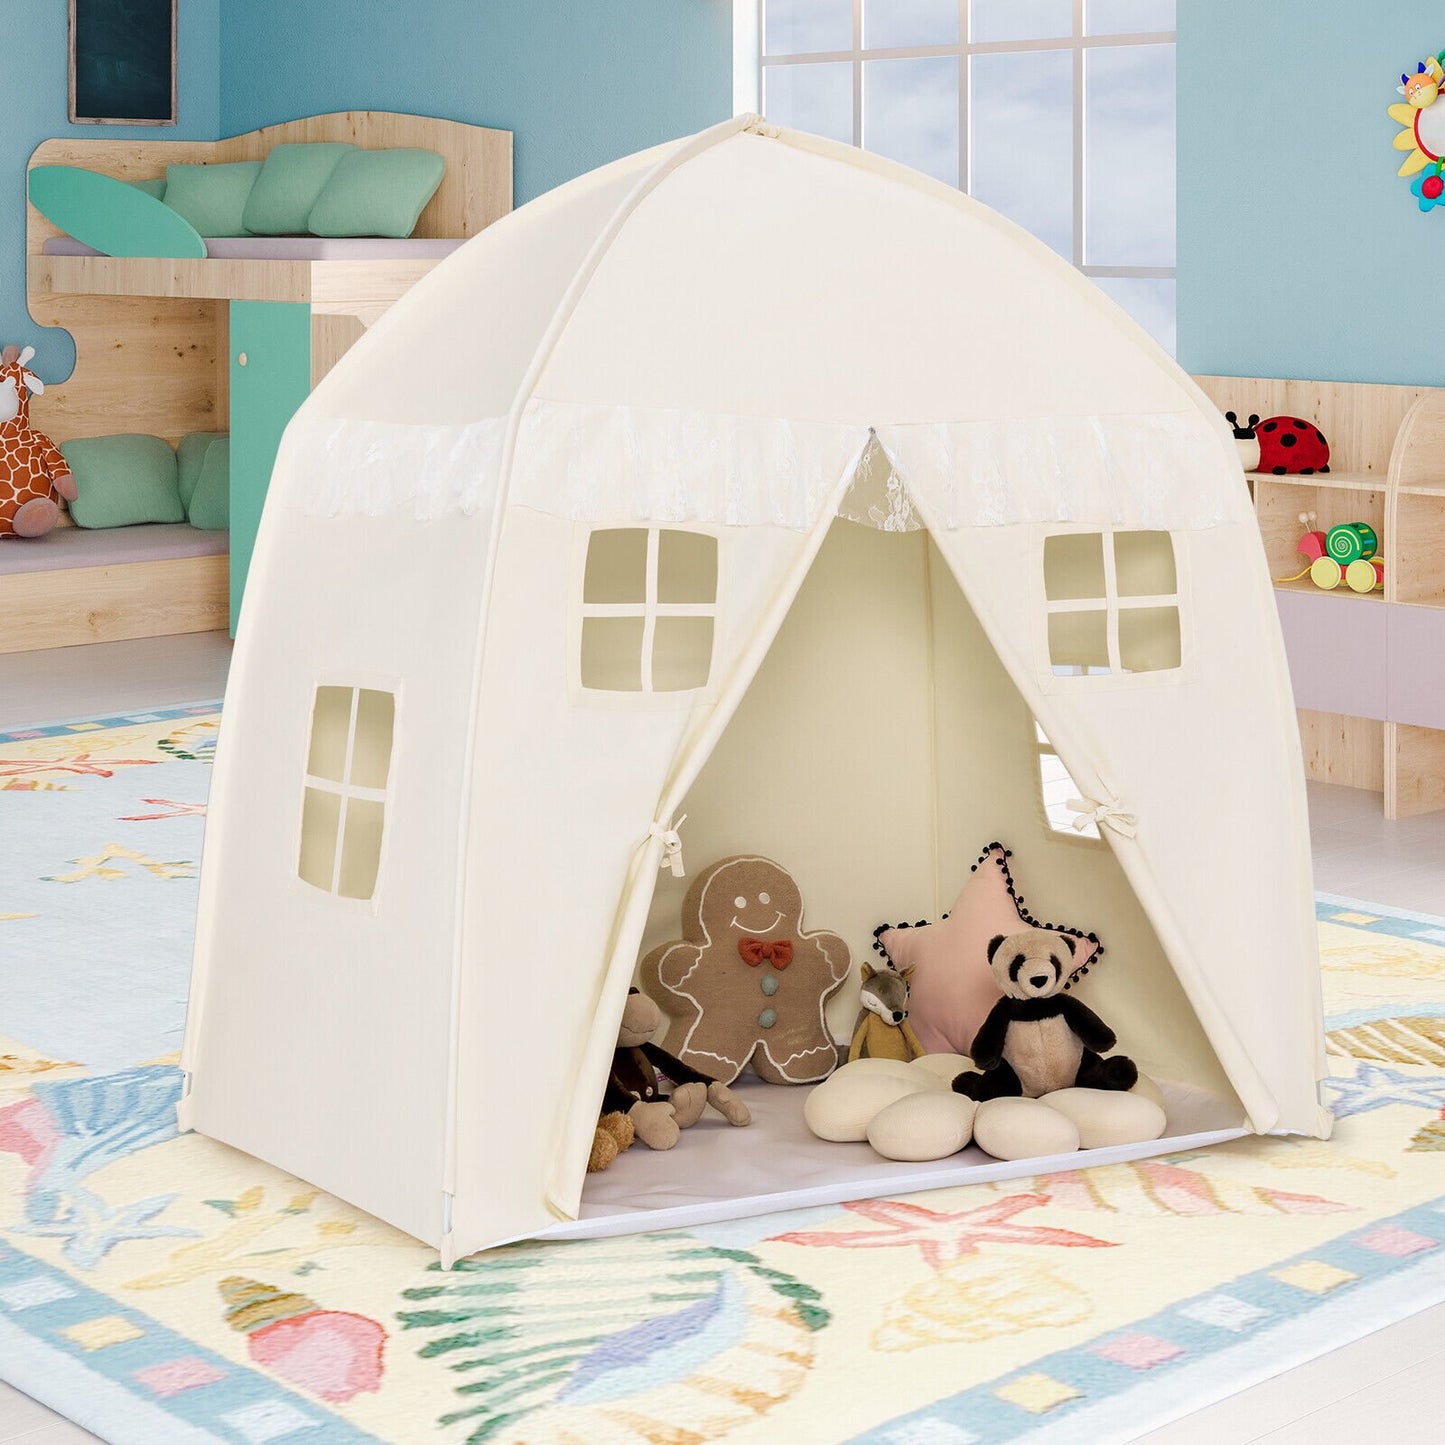 Portable Indoor Kids Play Castle Tent, White